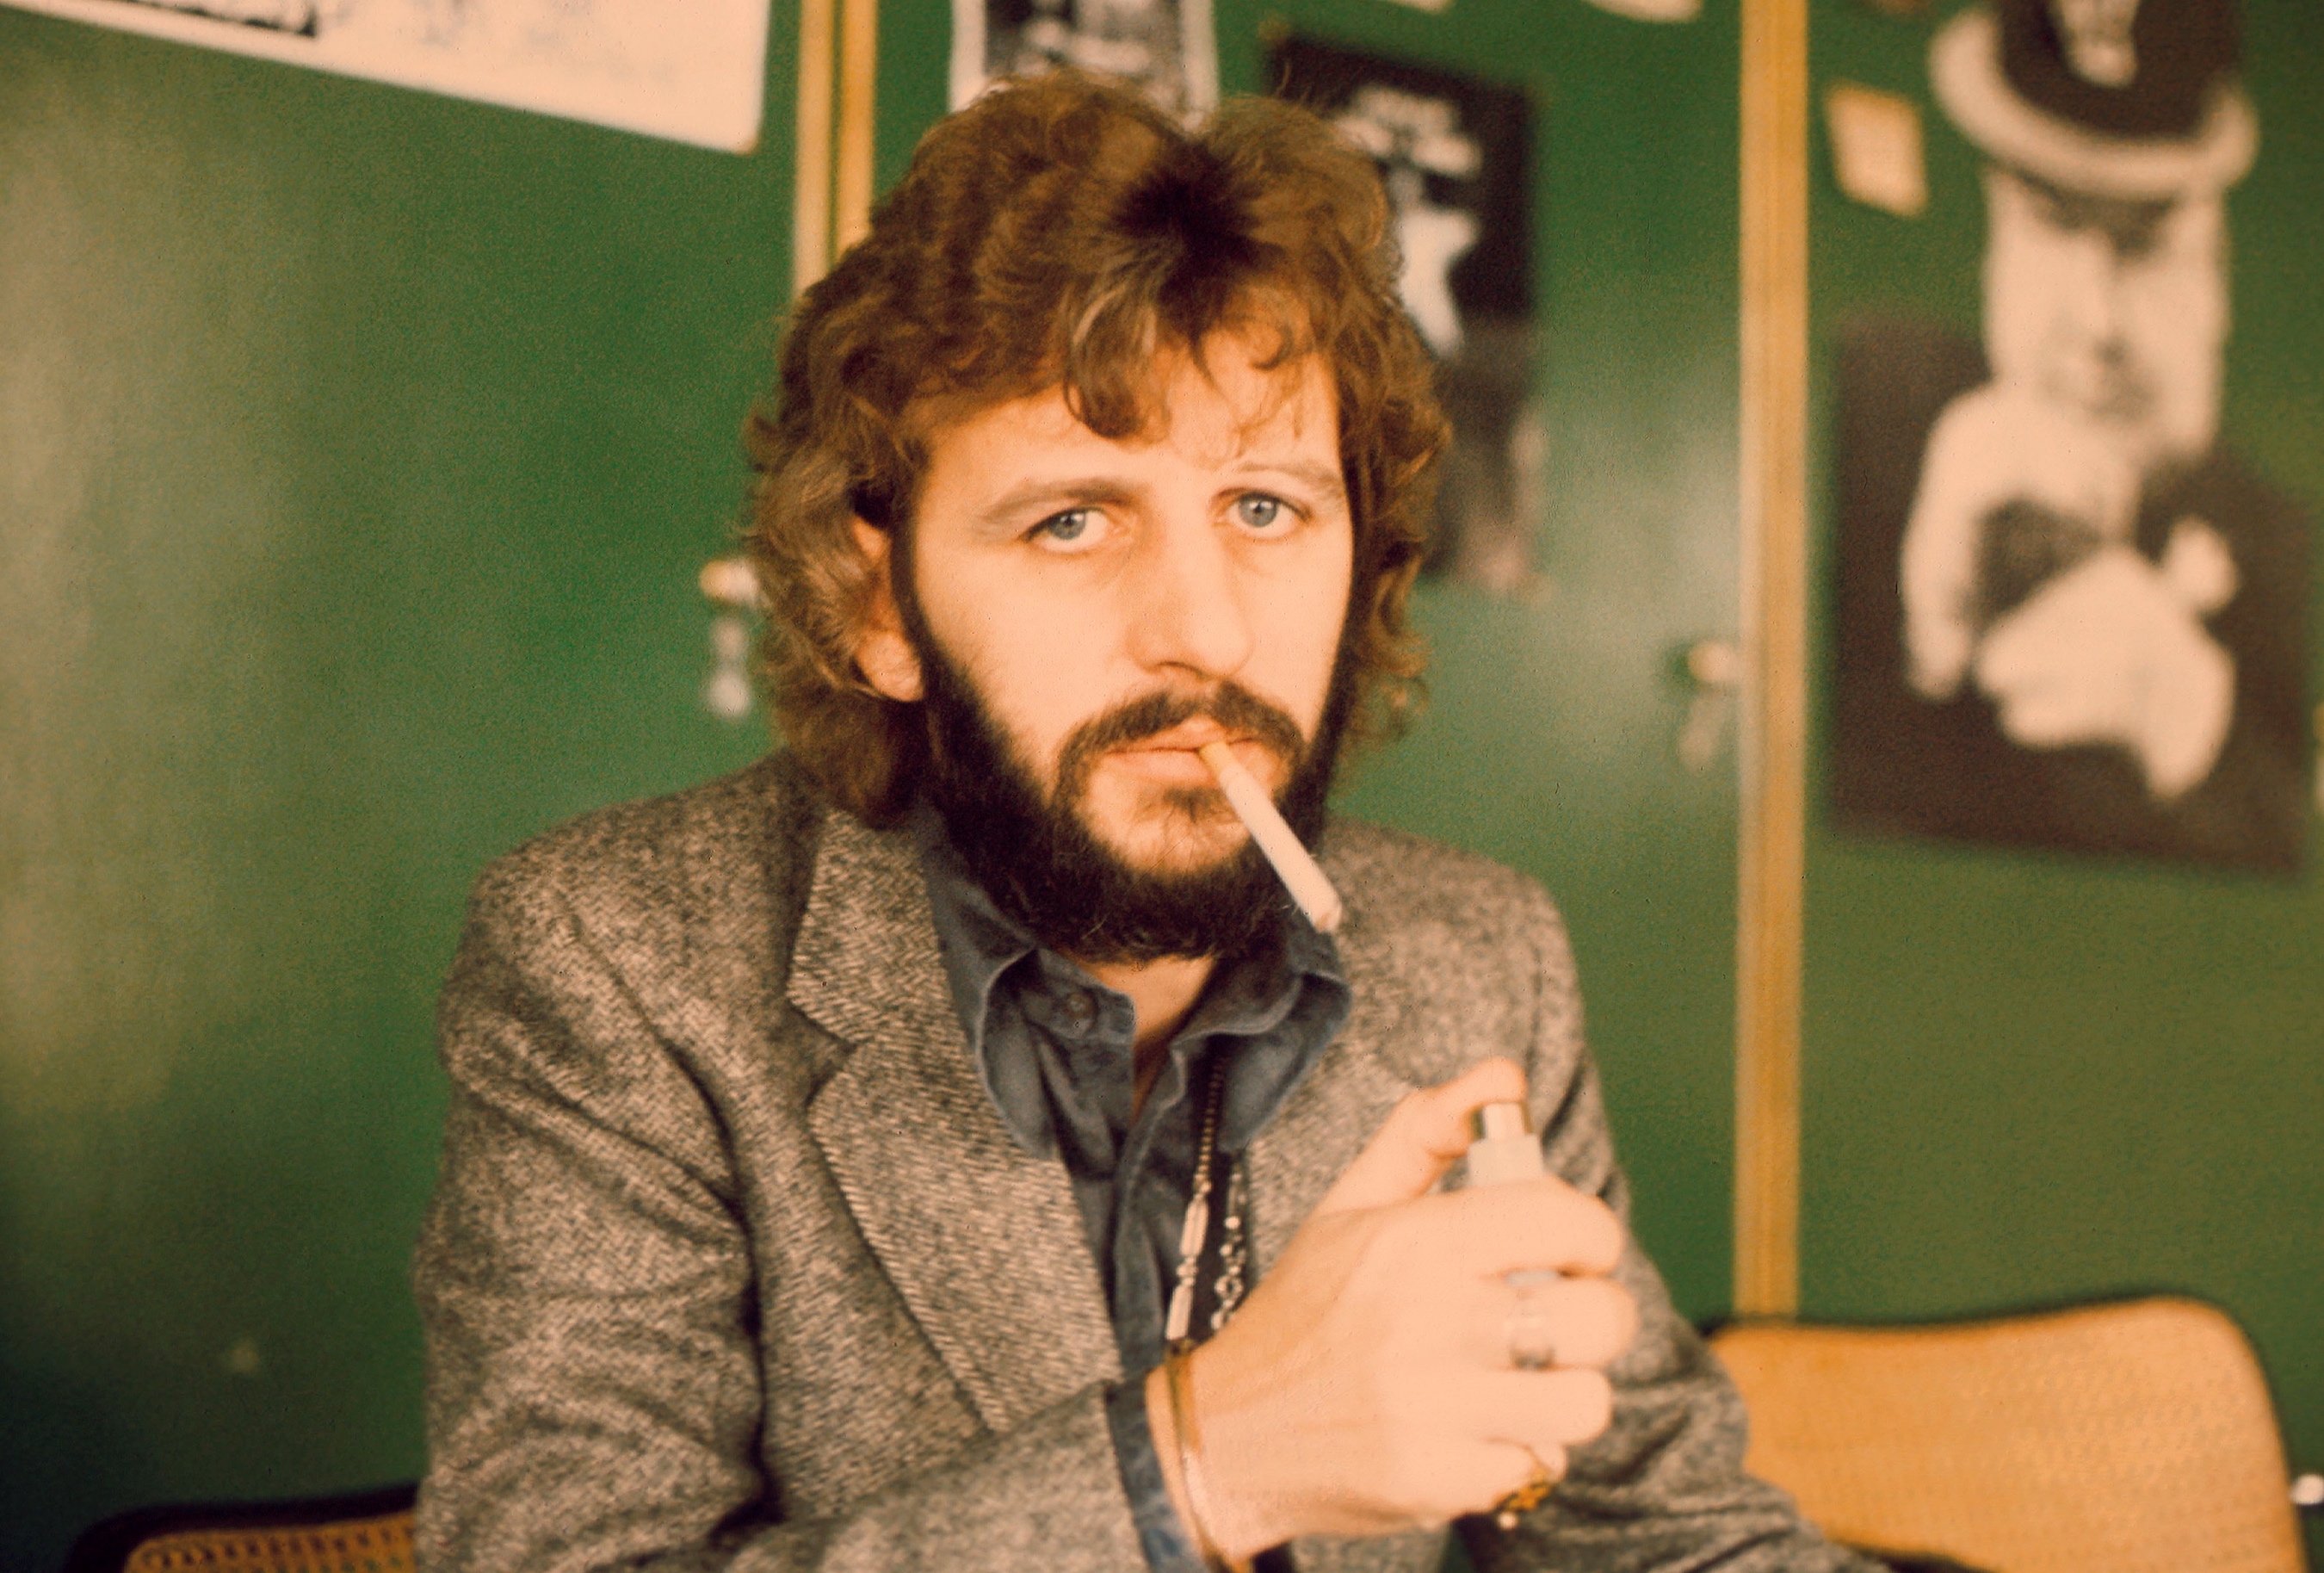 Songwriter and drummer Ringo Starr, formerly of The Beatles